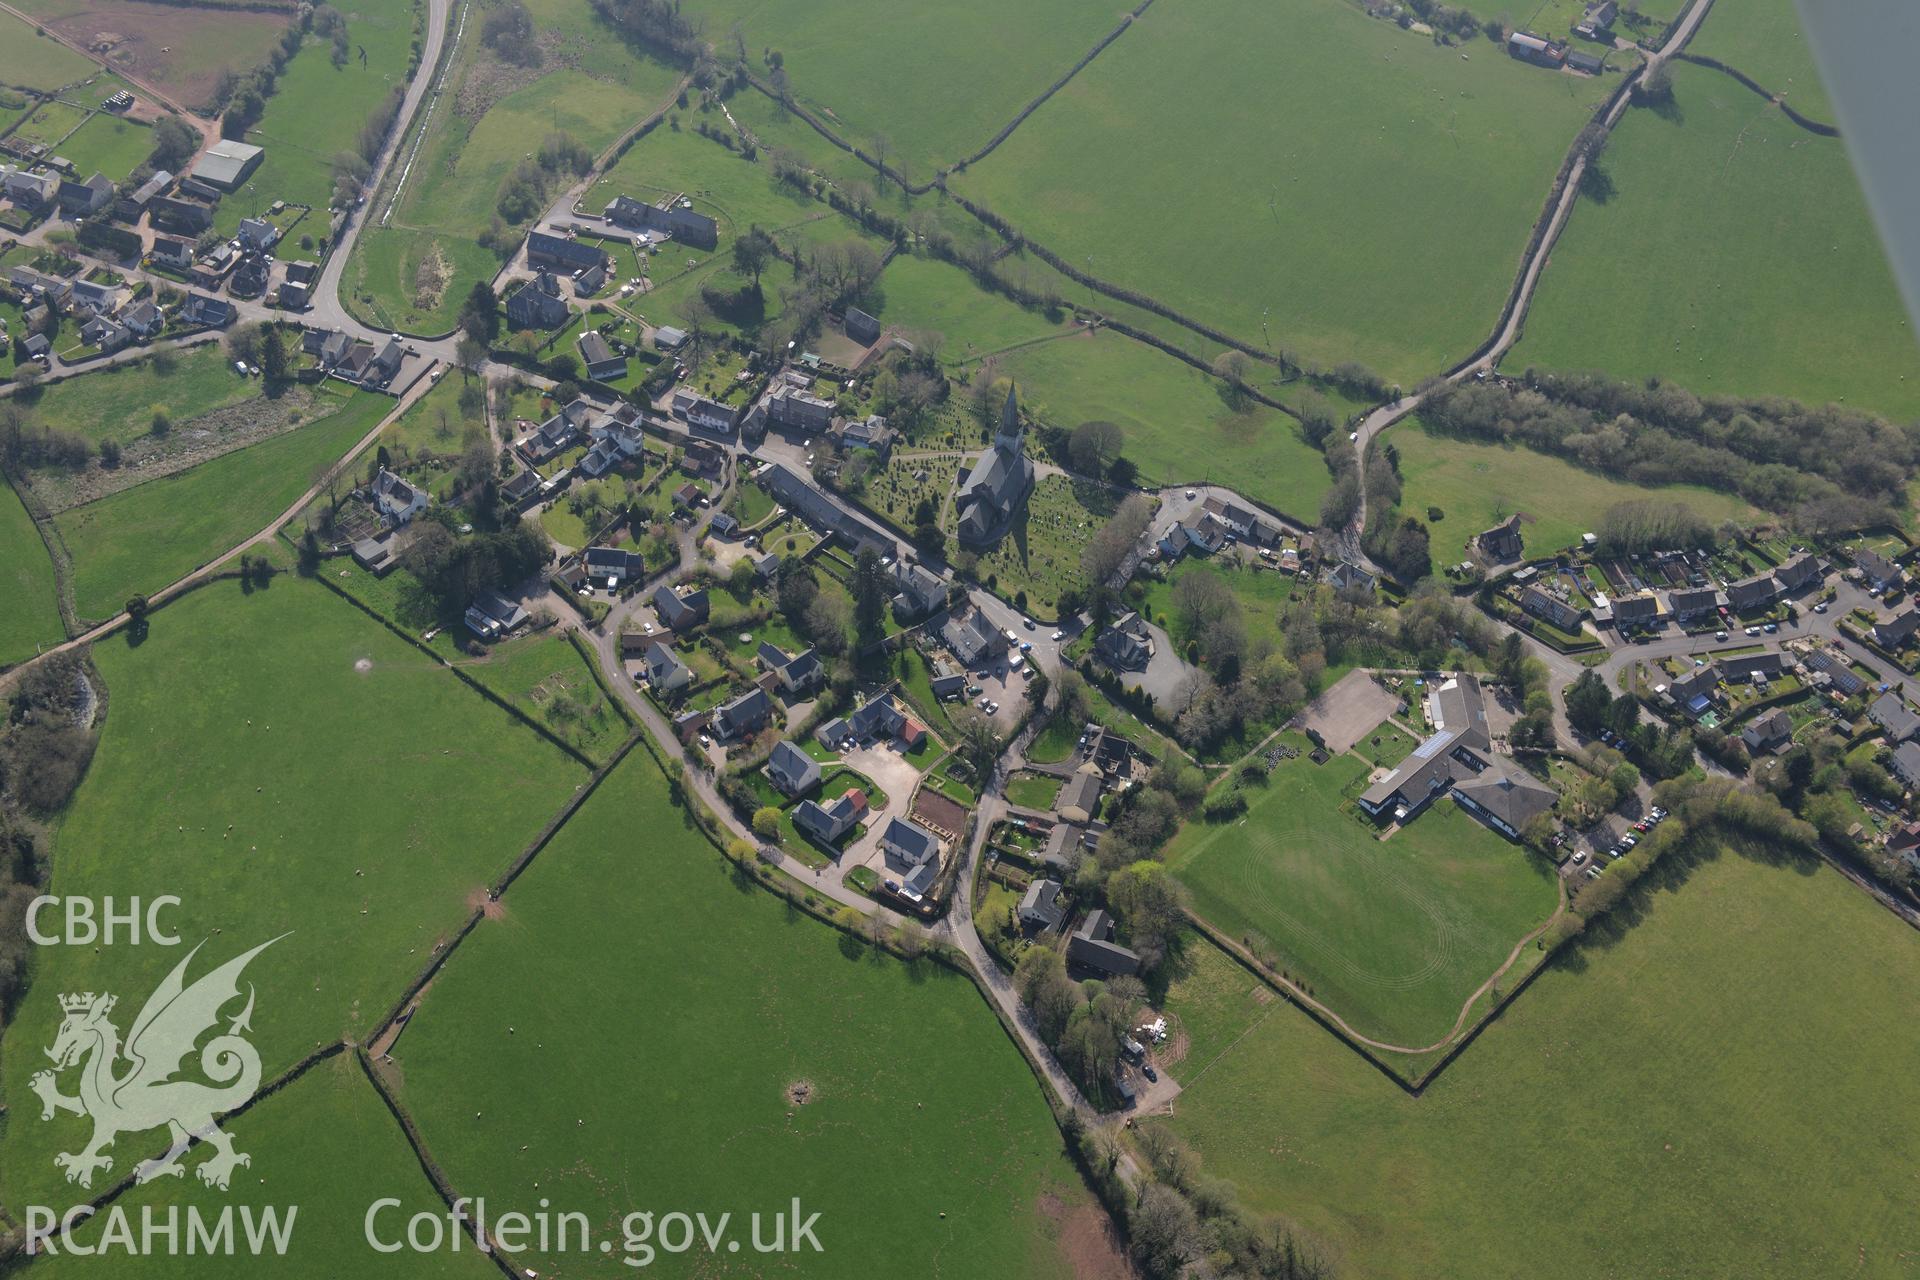 Trellech village and medieval borough including St. Nicholas' Church; medieval houses sites west of the Church; Methodist Church; Court Farm; Tump Terret; Trellech motte; village earthworks and virtuous well. Oblique aerial photograph taken during the Royal Commission's programme of archaeological aerial reconnaissance by Toby Driver on 21st April 2015.